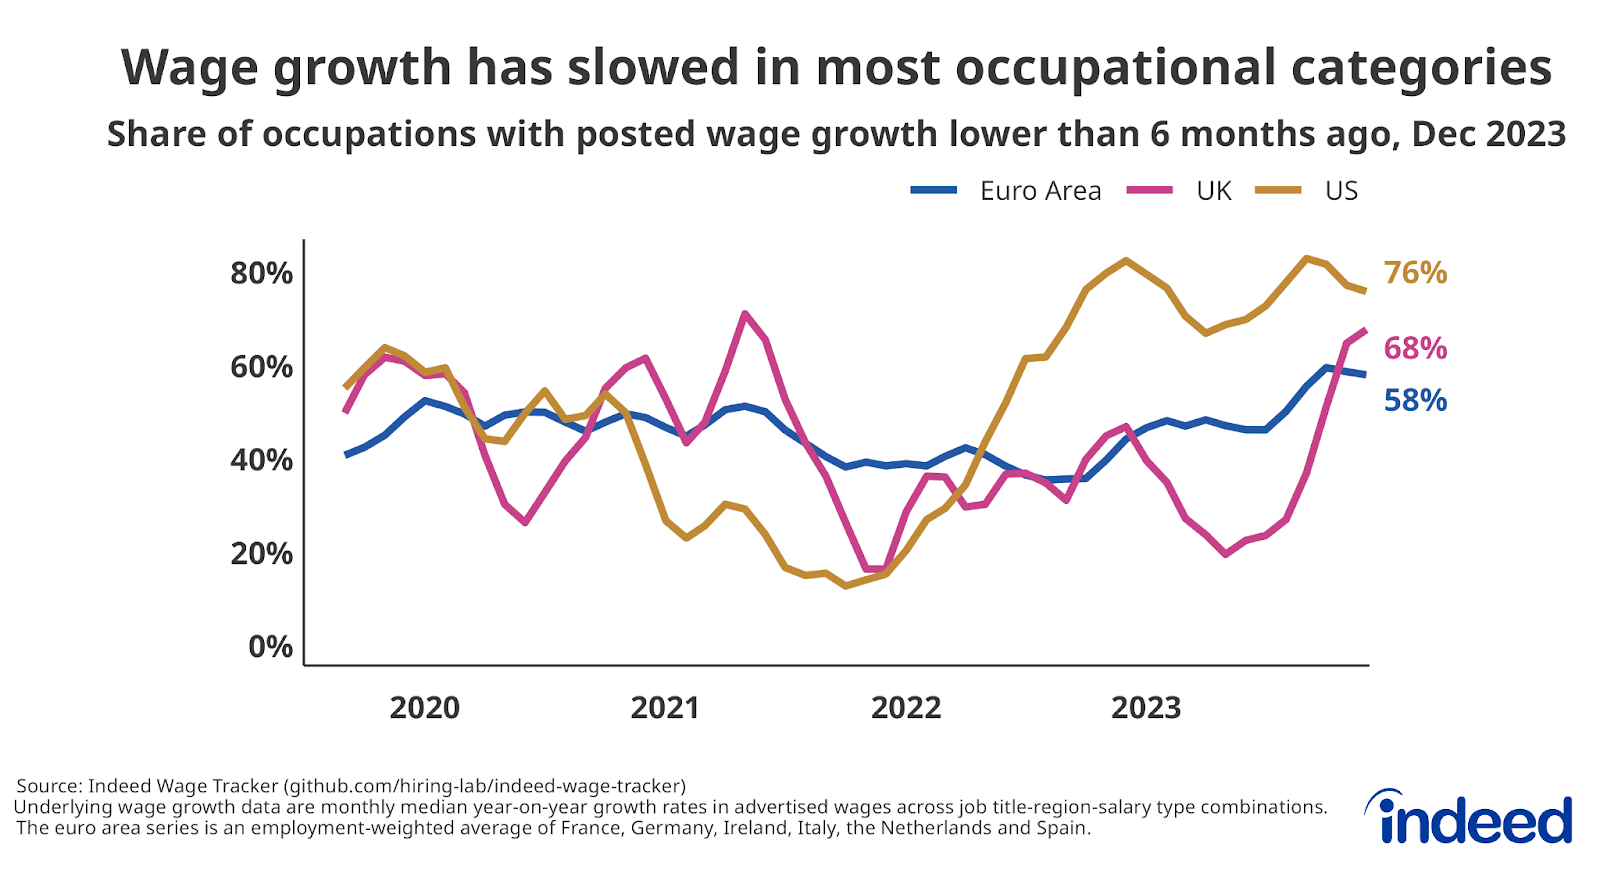 Line chart titled “Wage growth has slowed in most occupational categories”. With a y-axis range of 0% to 80% and an x-axis range from 2020 to 2023, the chart shows the share of occupations with posted wage growth that is lower than six months ago for the euro area, the UK, and the US to December 2023.